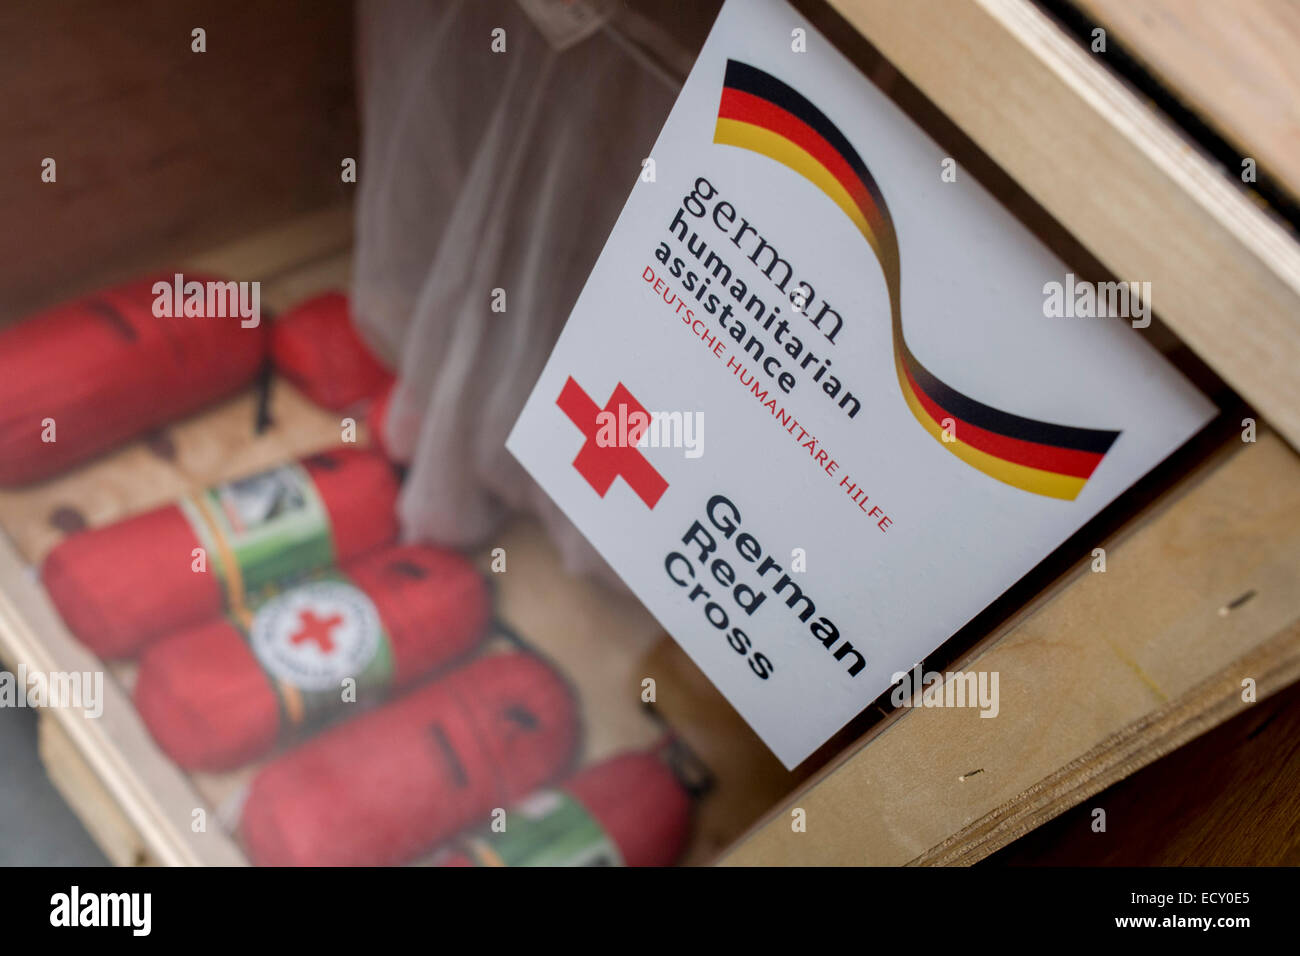 First Aid kits in amergency supplies warehouse, Deutsches Rotes Kreuz (DRK - German Red Cross) at their logistics centre at Berl Stock Photo